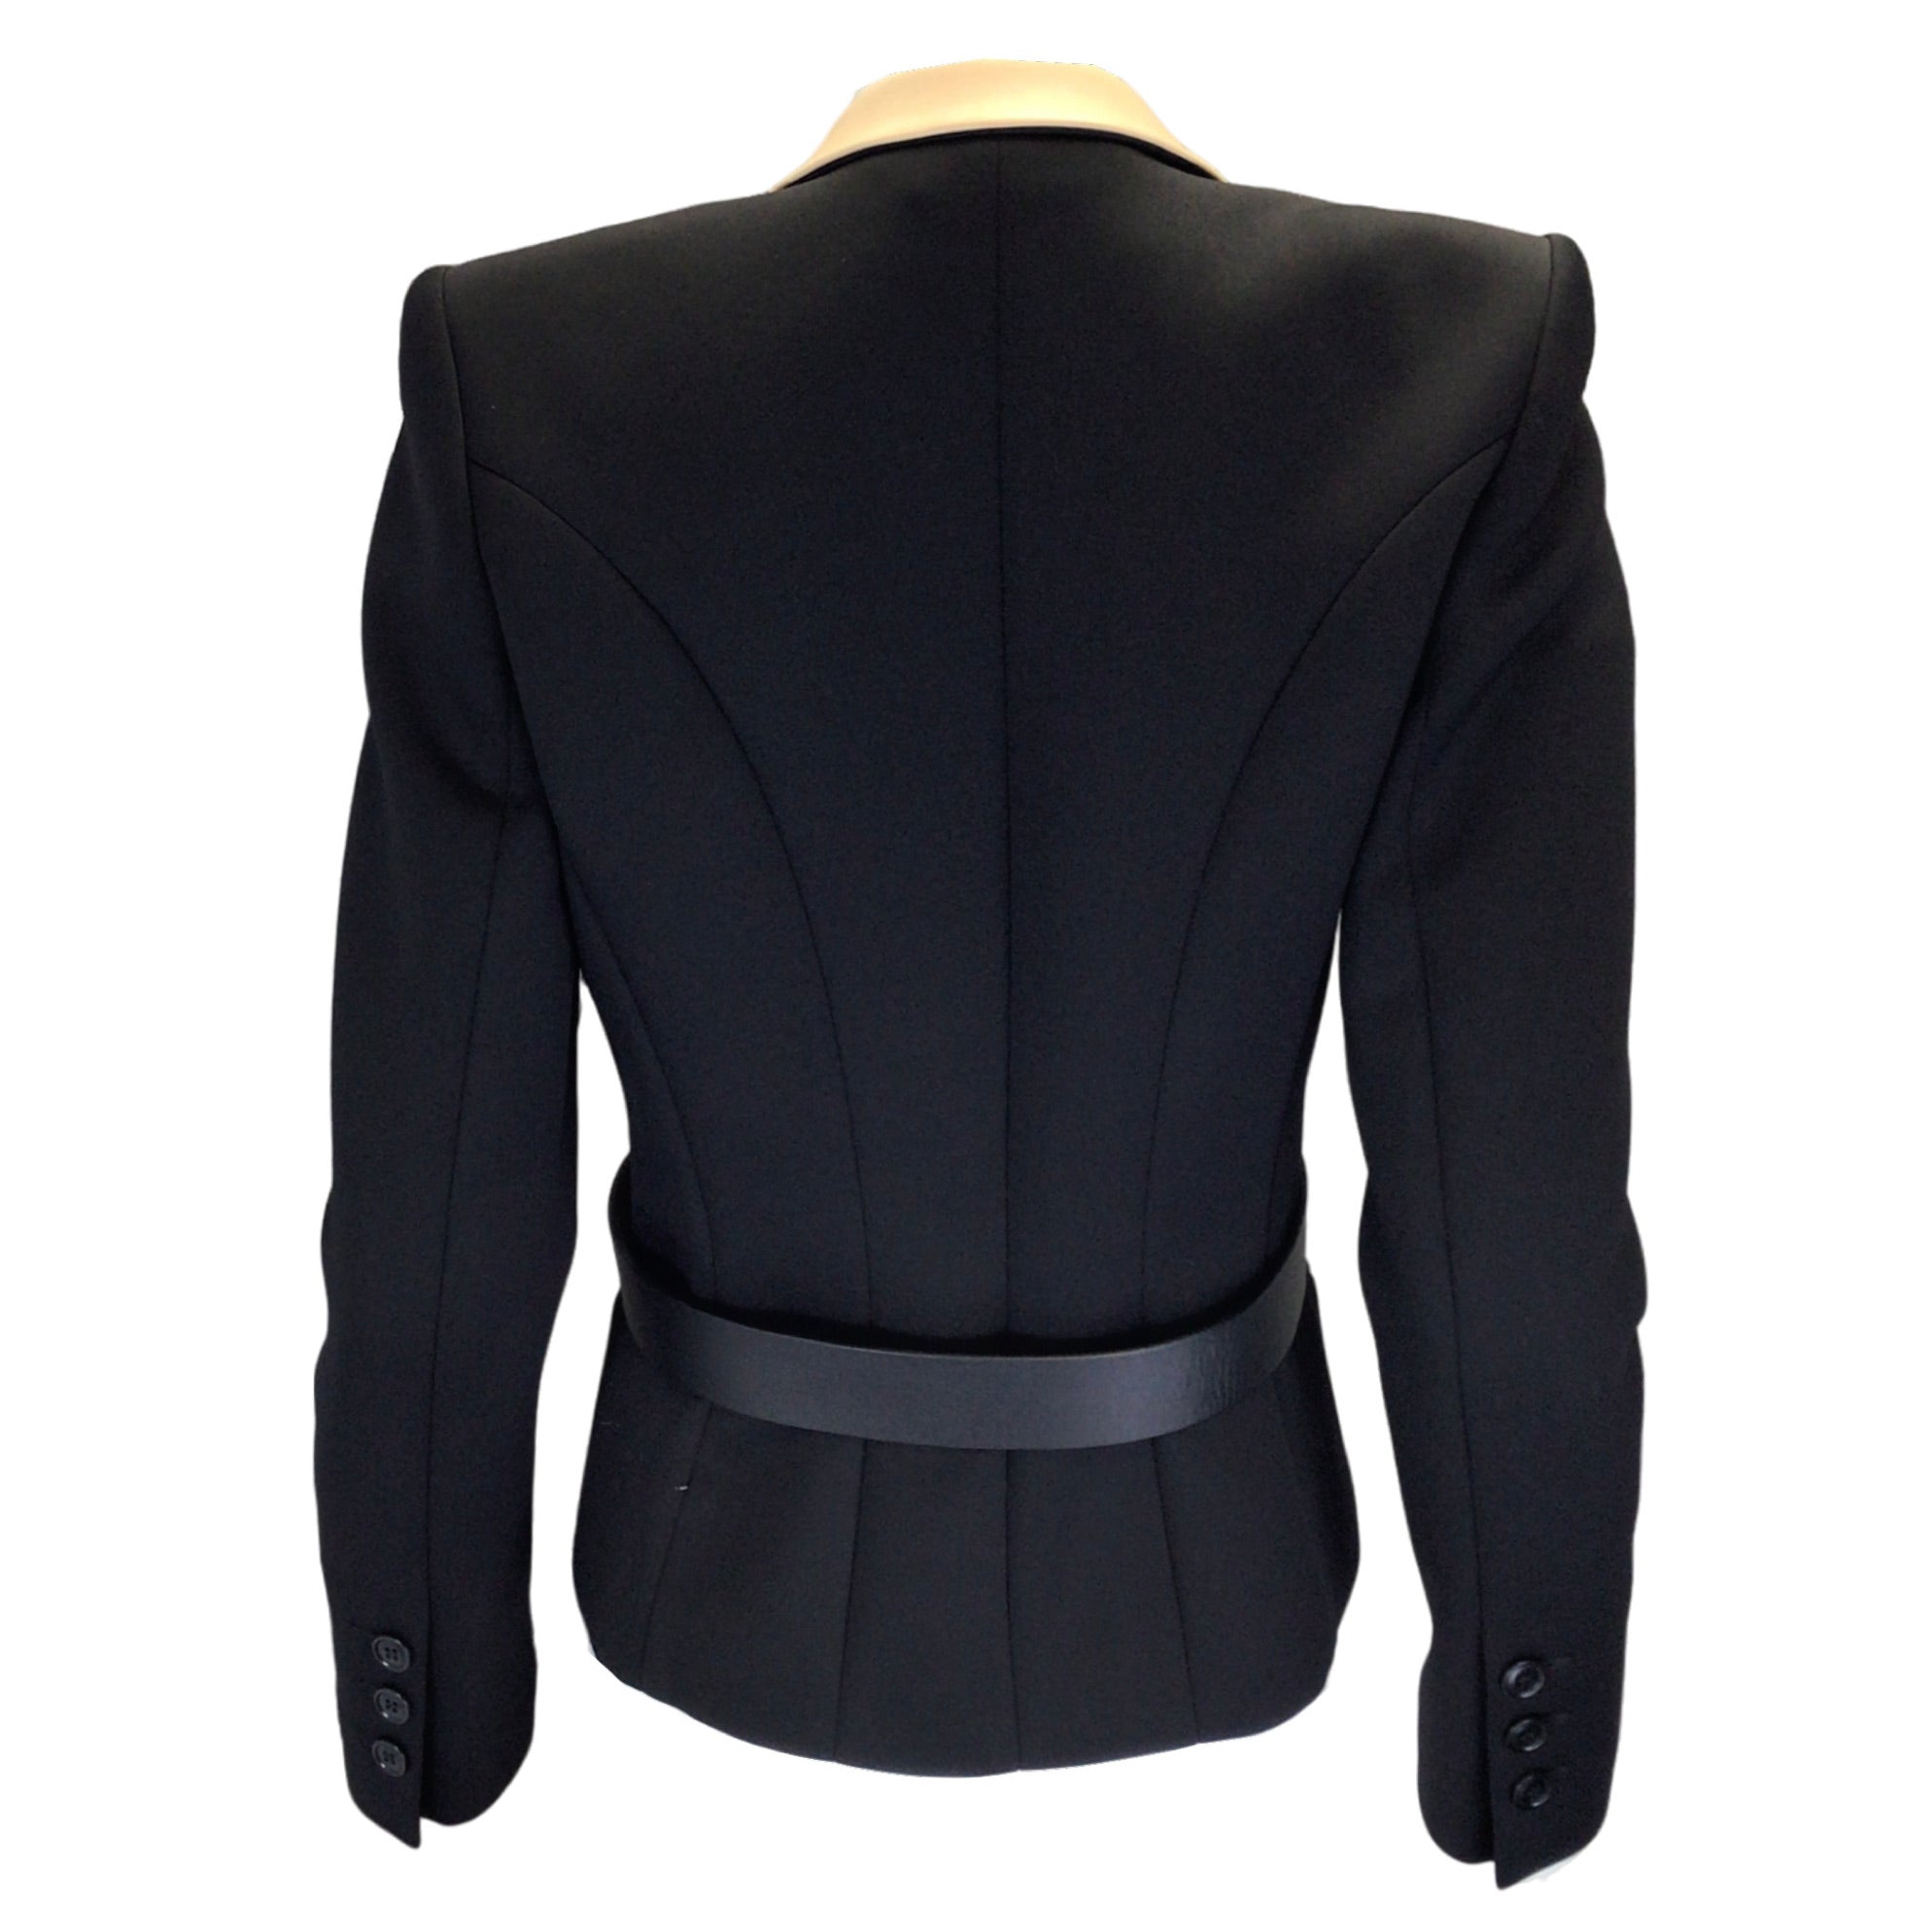 Barbara Bui Black / Beige Lambskin Leather Trimmed Leather Belted Technical Fabric Blazer